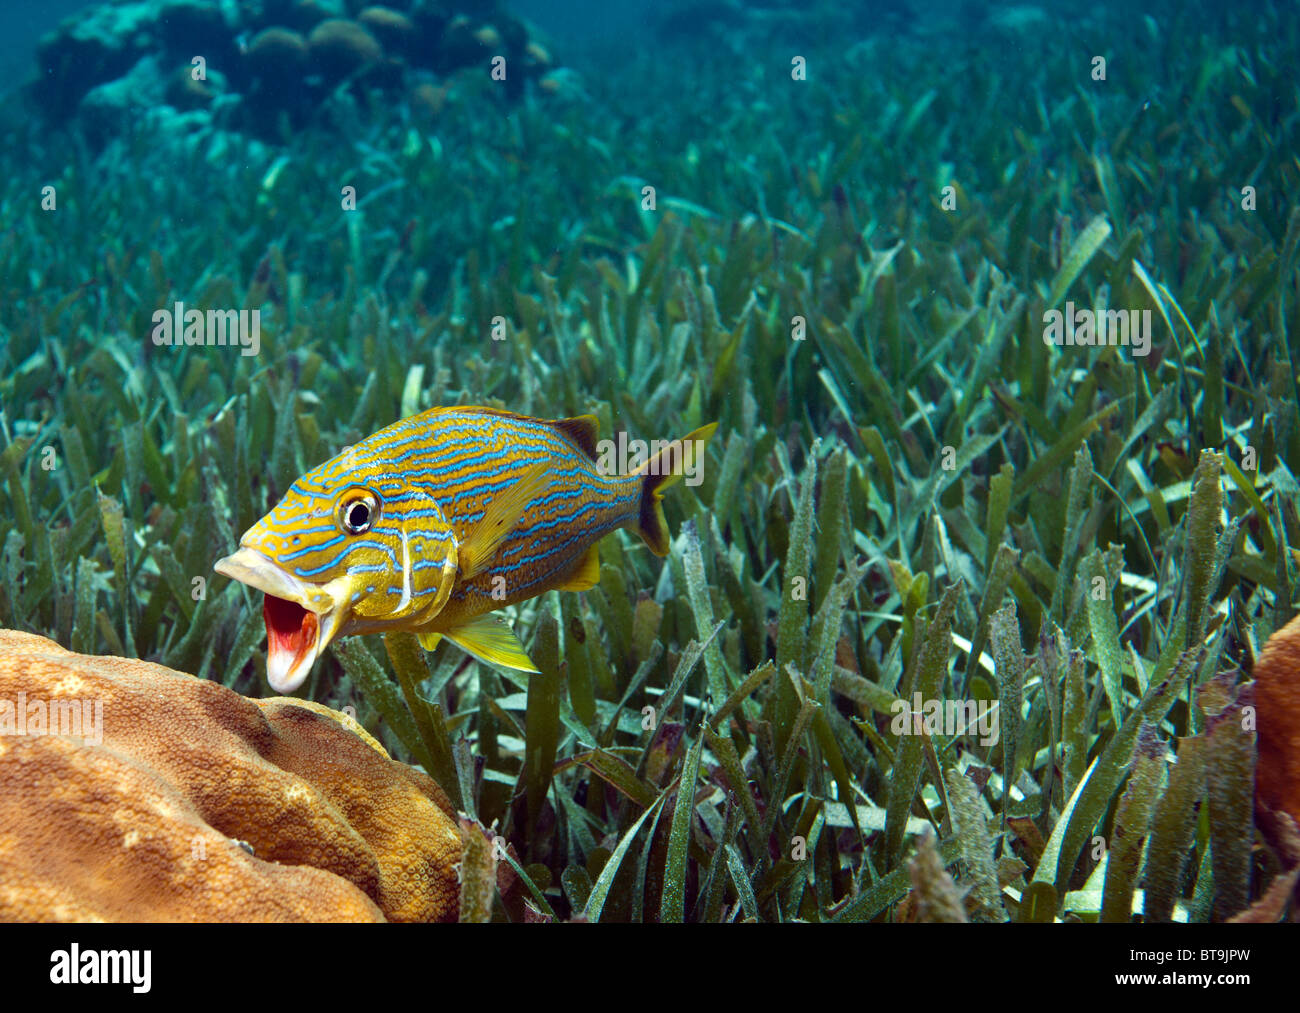 Grunt in sea grass at cleaning station opening it's mouth Stock Photo